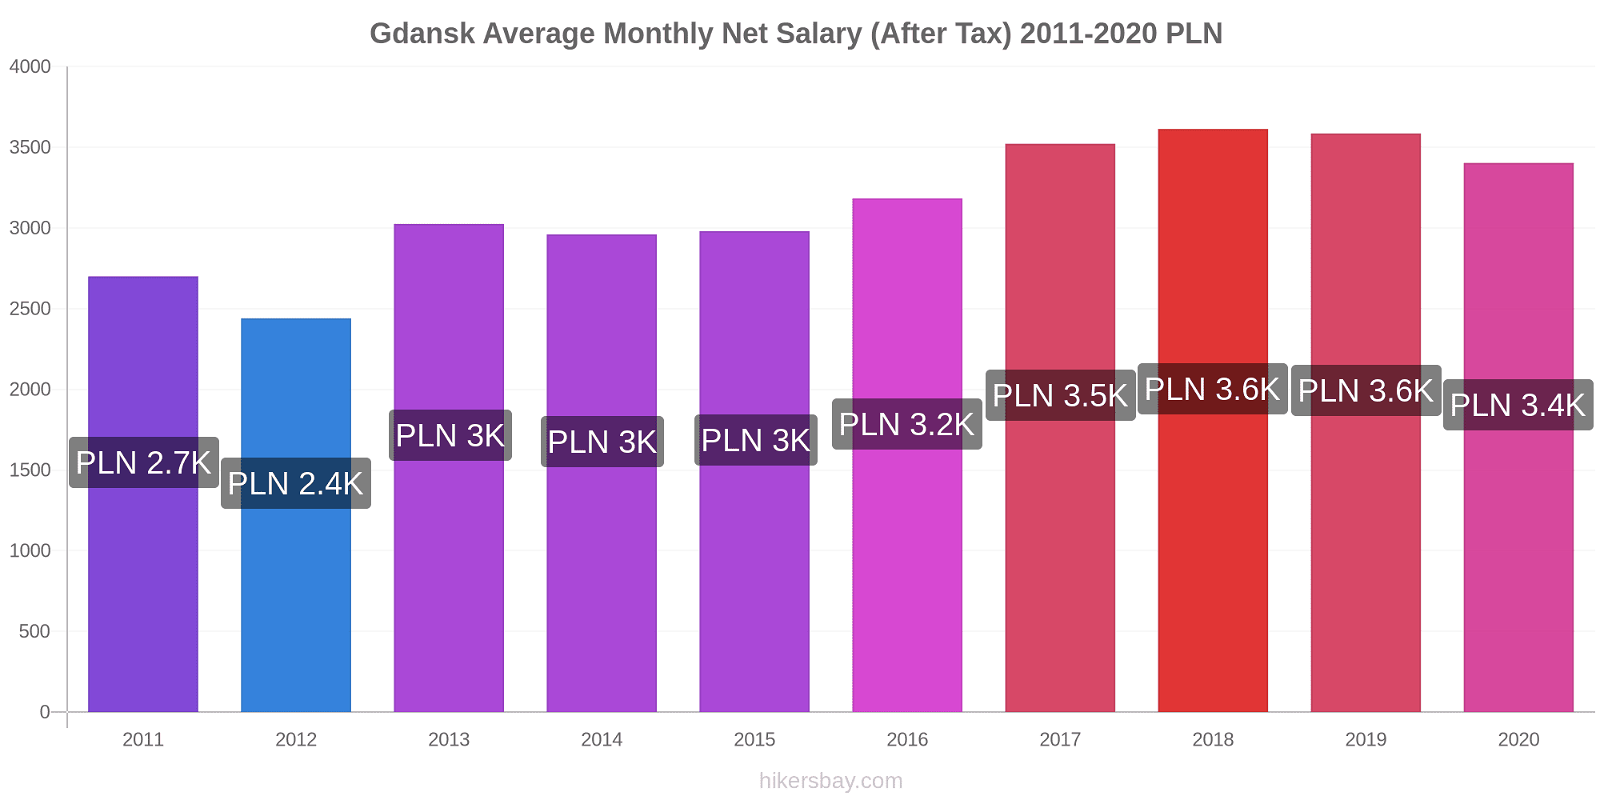 Gdansk price changes Average Monthly Net Salary (After Tax) hikersbay.com